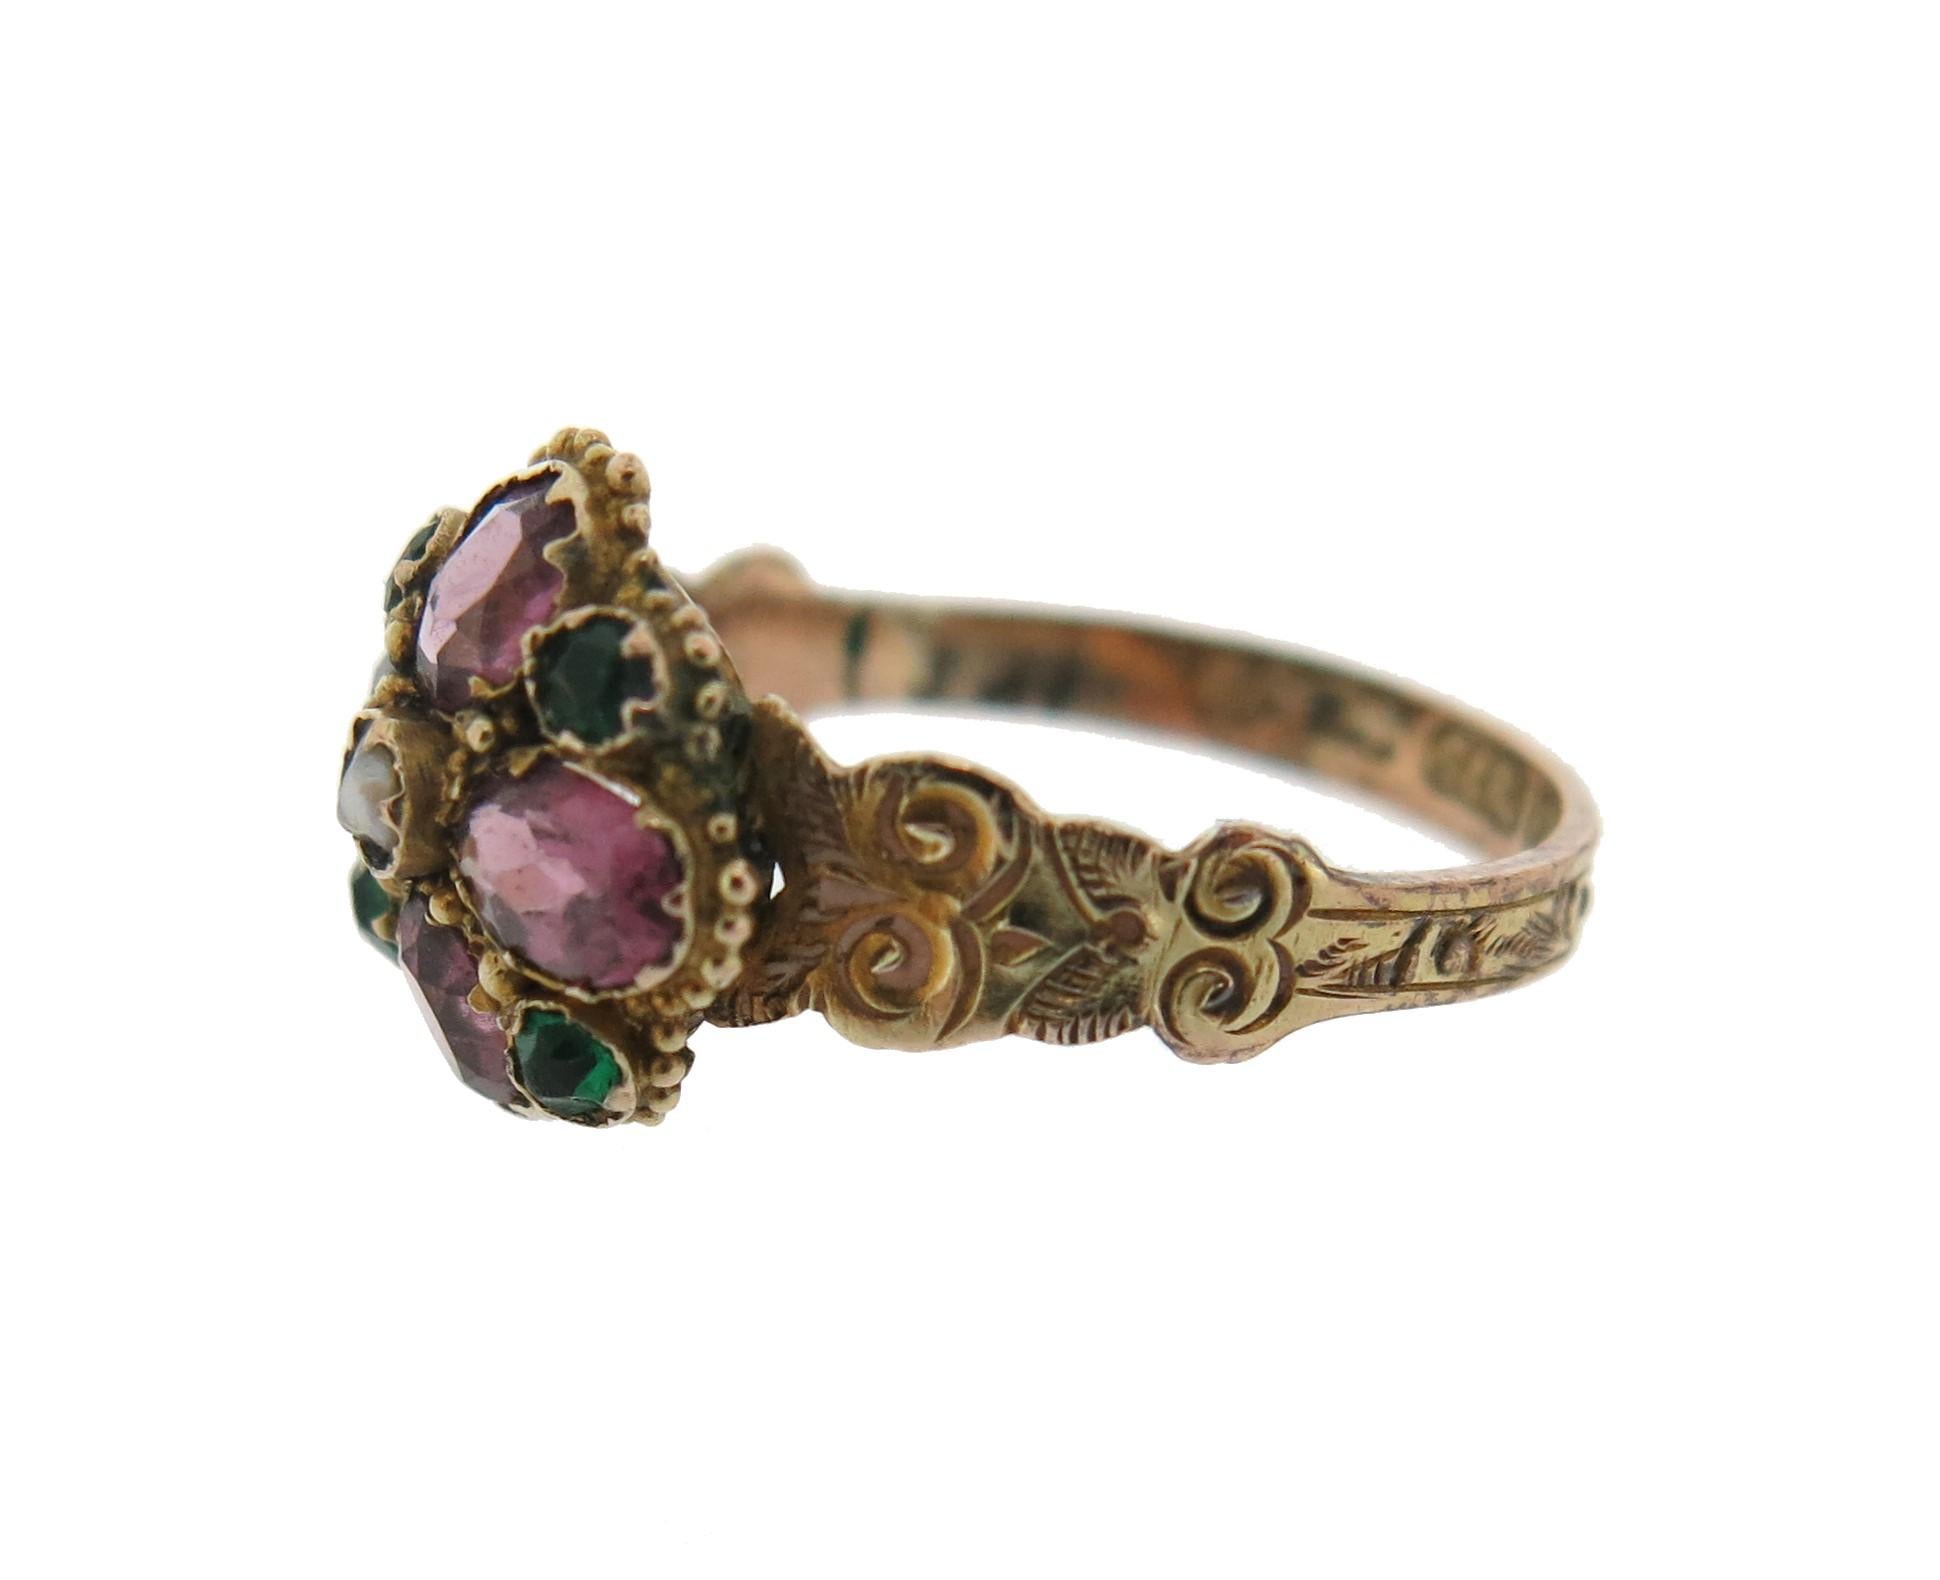 Oval Cut Victorian Garnet and Emerald Ring